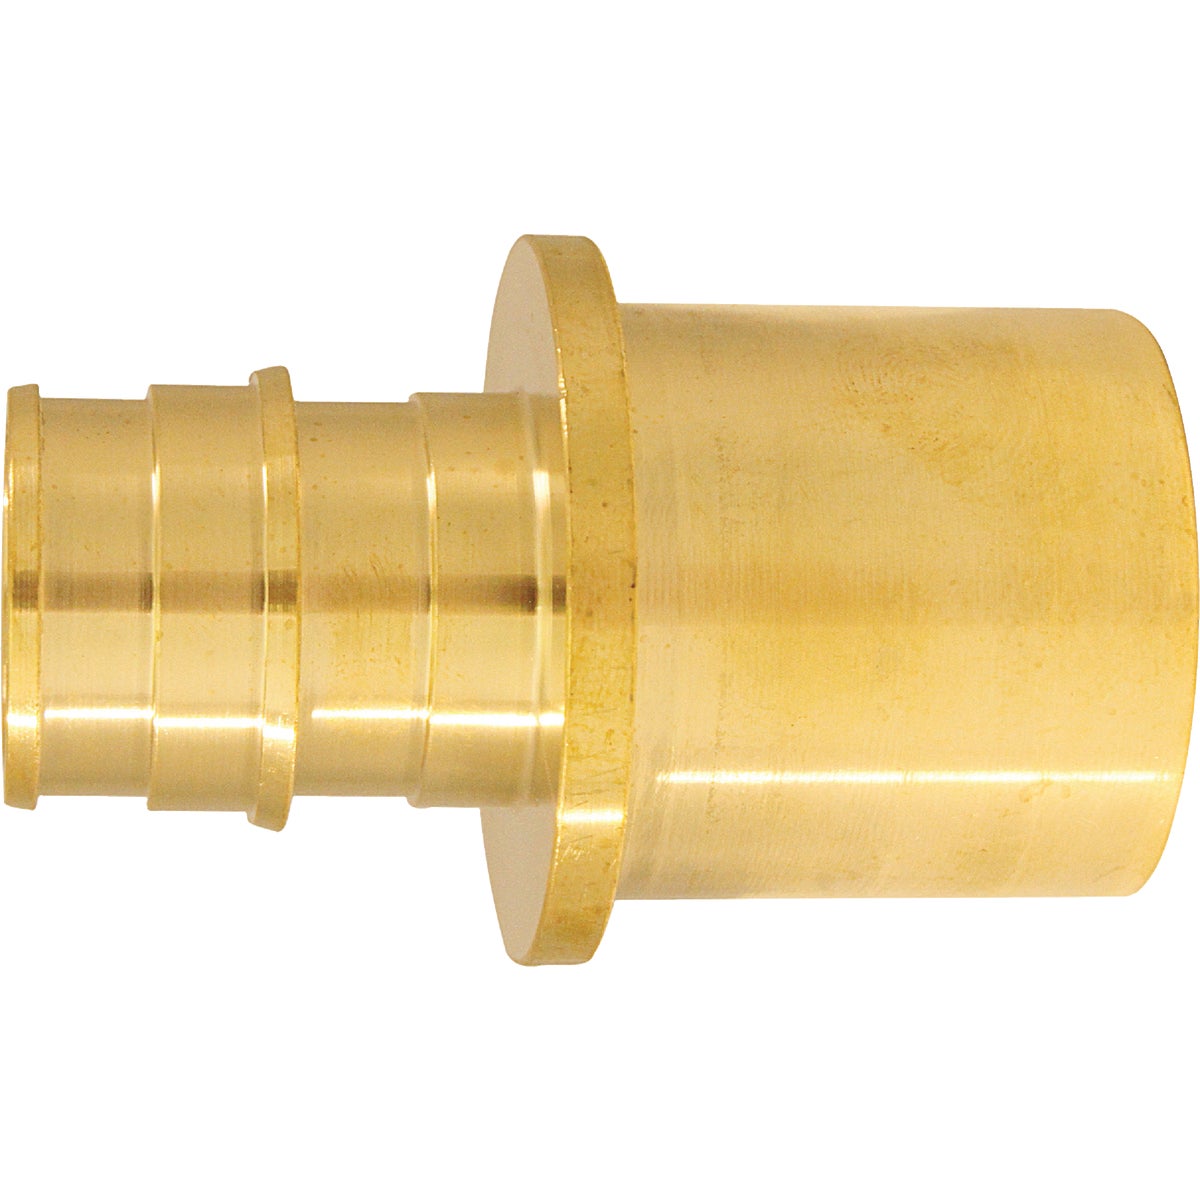 Apollo Retail 3/4 In. x 1 In. Brass Insert Fitting MSWT PEX A Adapter